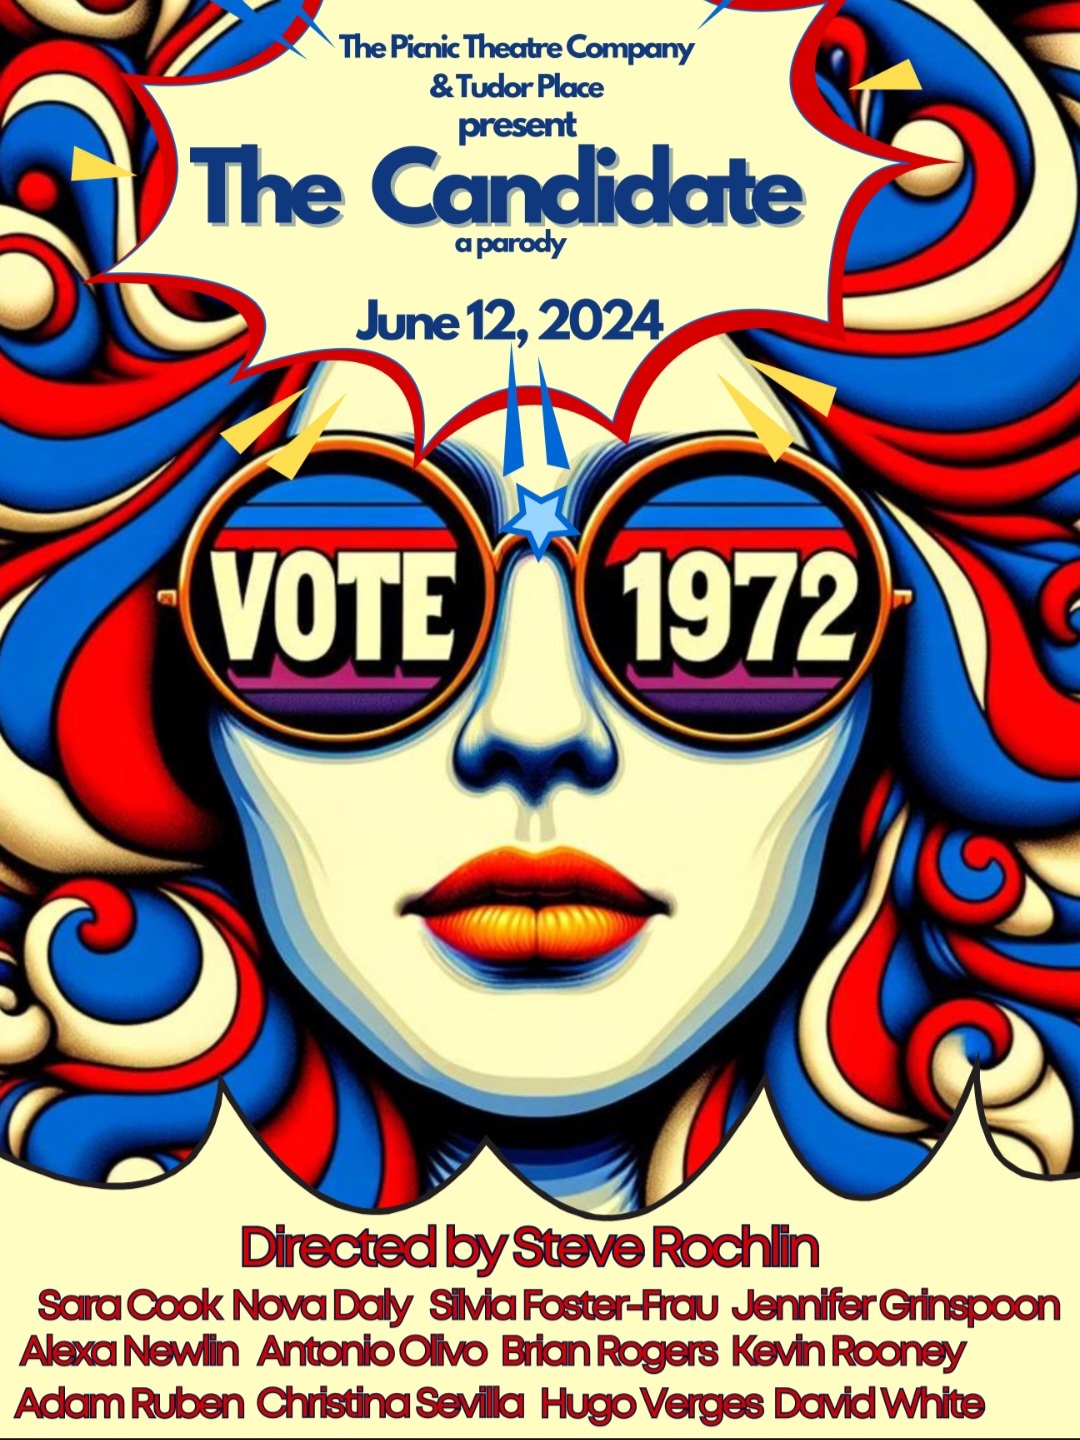 Funky woman's face with swirling hair and sun glasses that say vote on left side and 1972 on right side